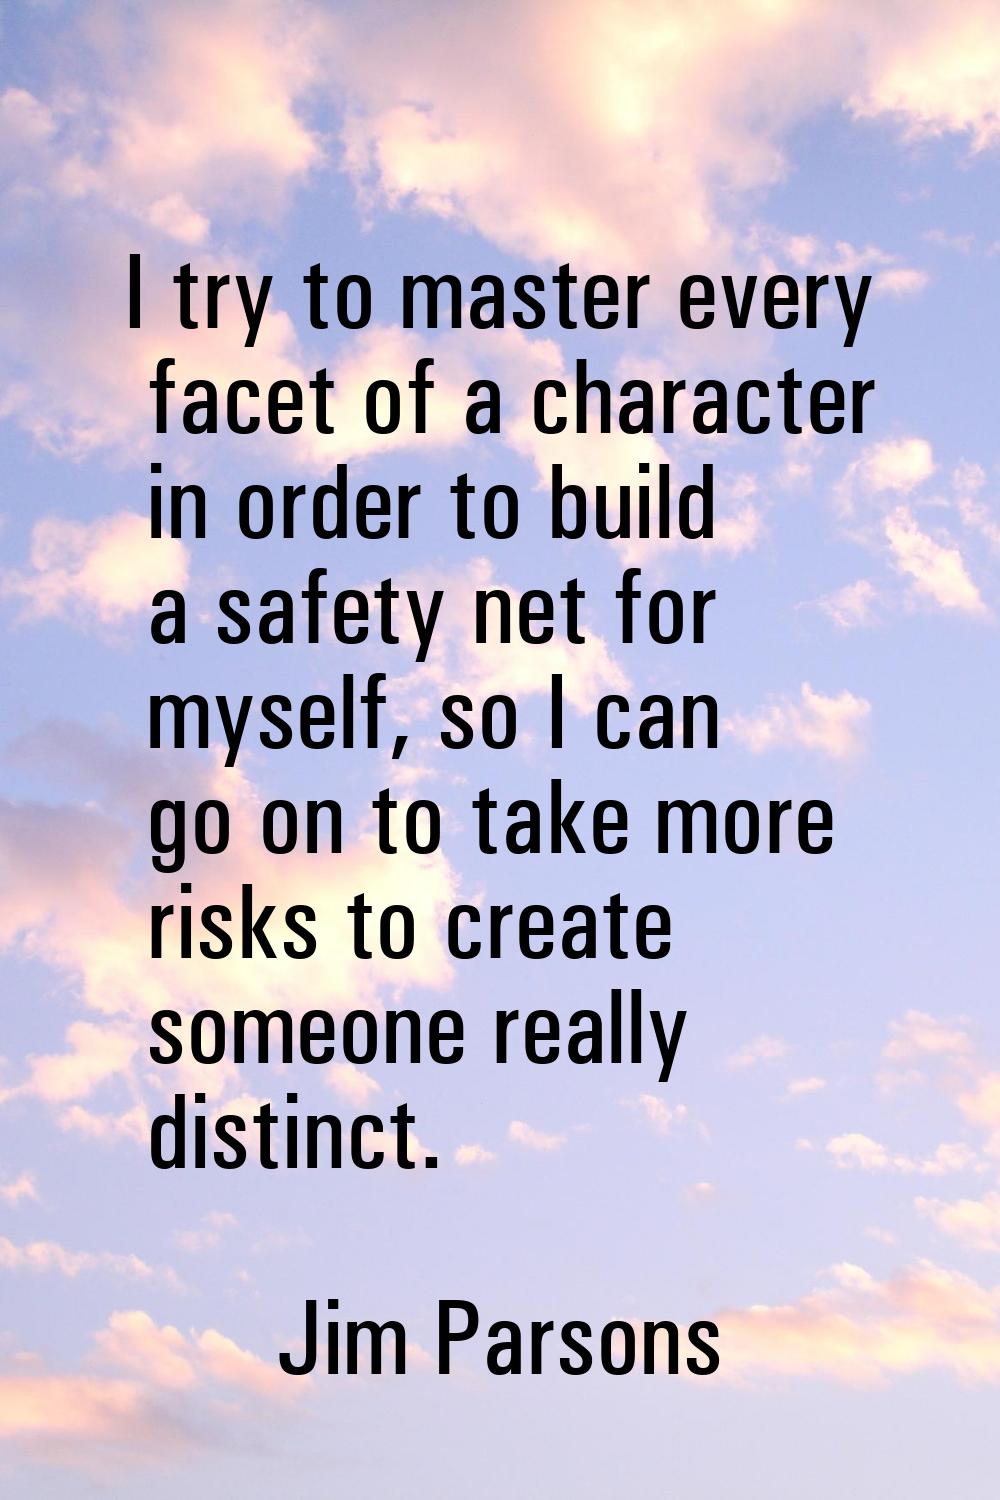 I try to master every facet of a character in order to build a safety net for myself, so I can go o